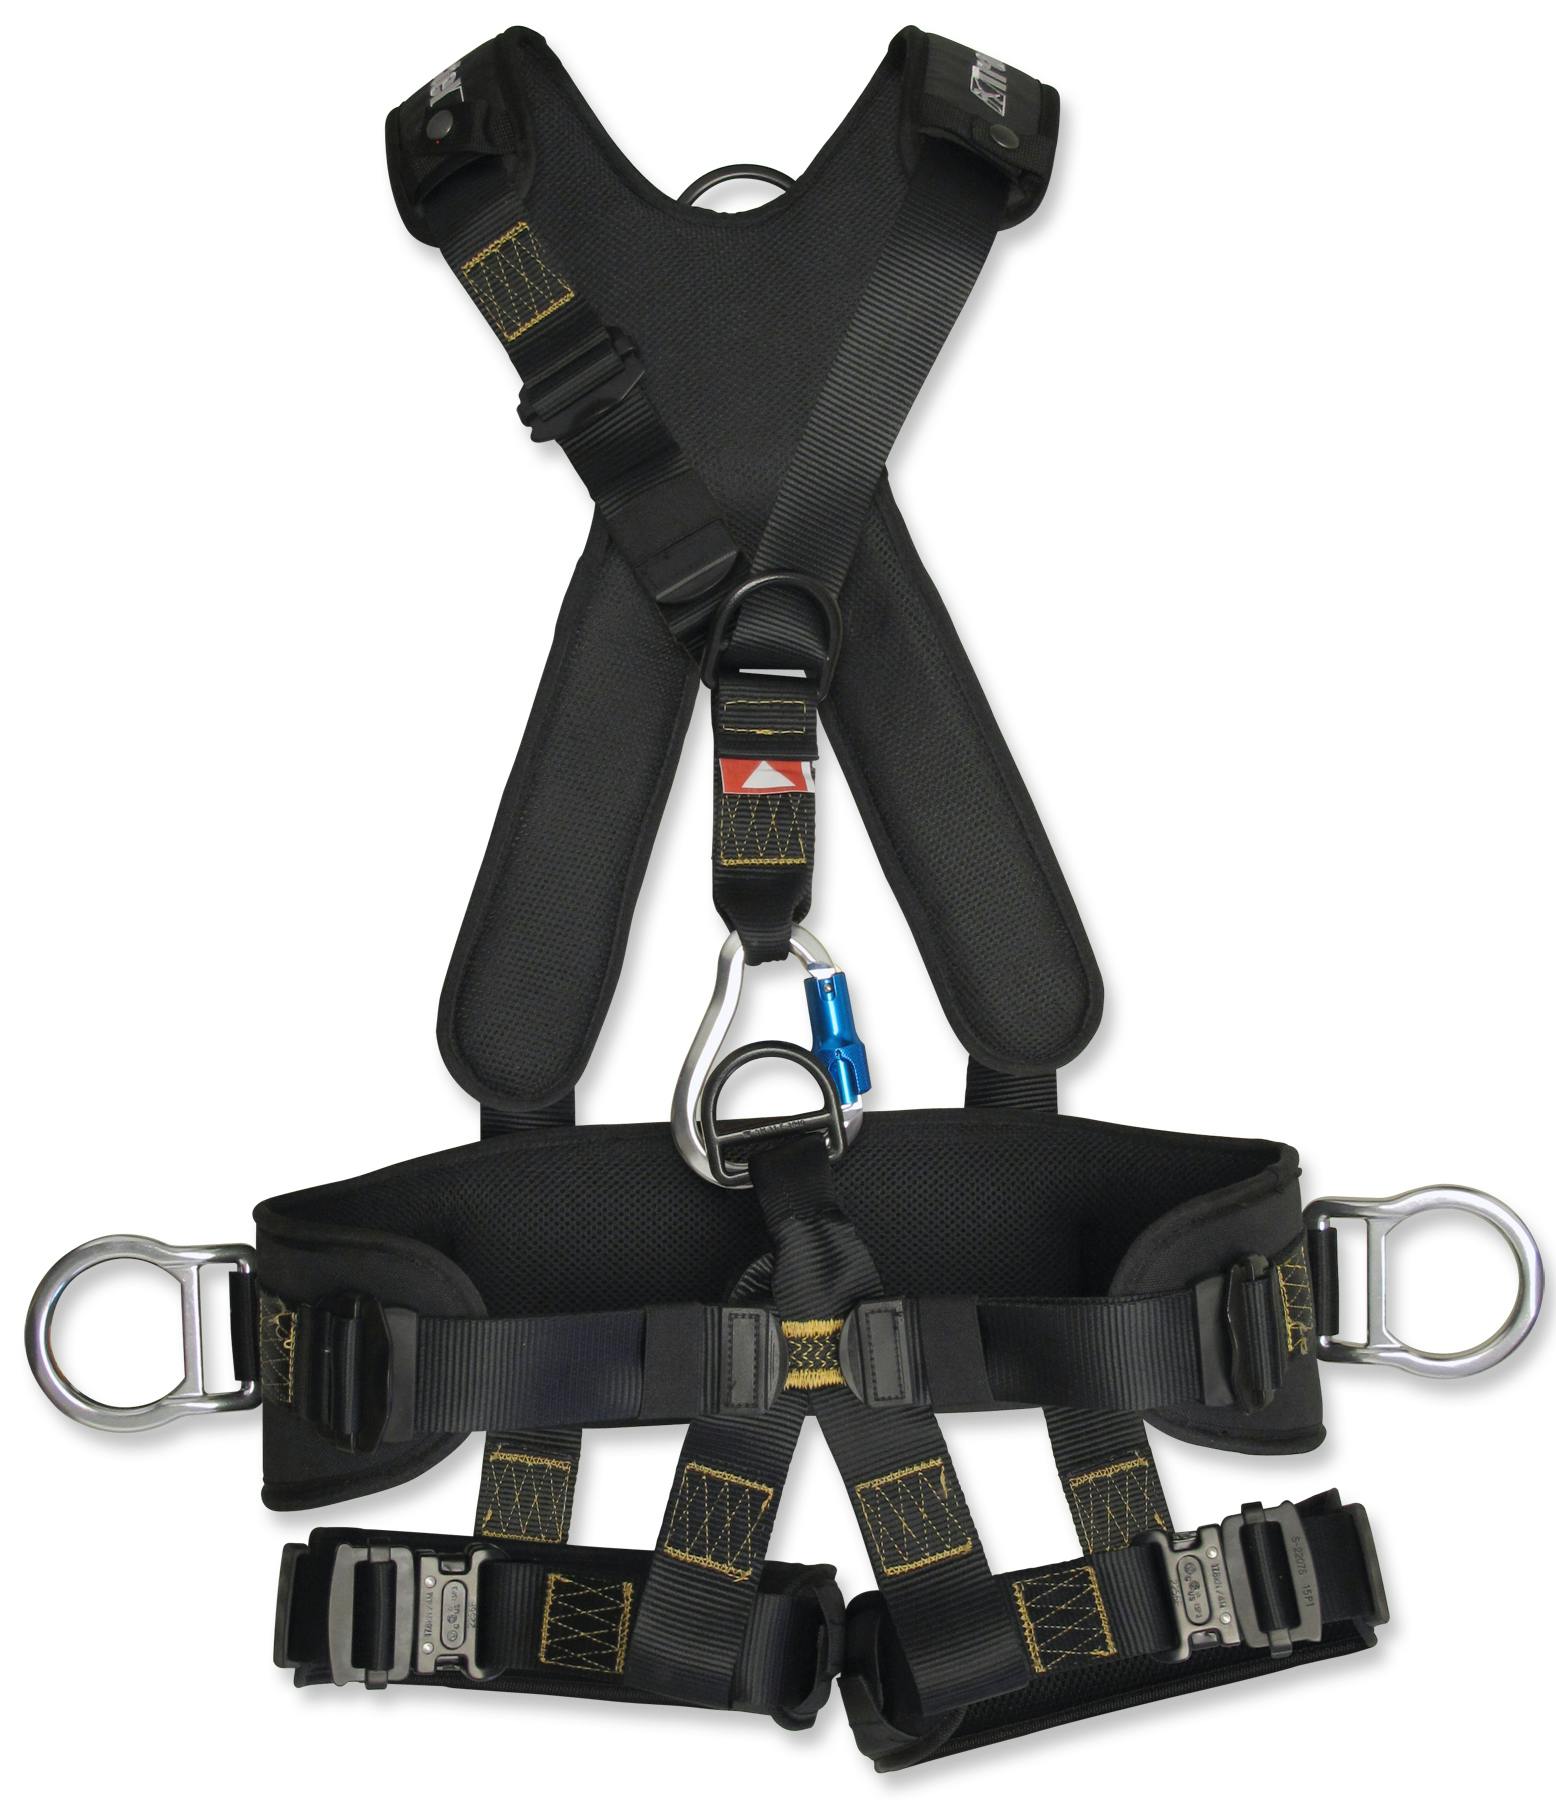 Tractel Introduces Versatile, Comfortable Safety Harness | Construction News